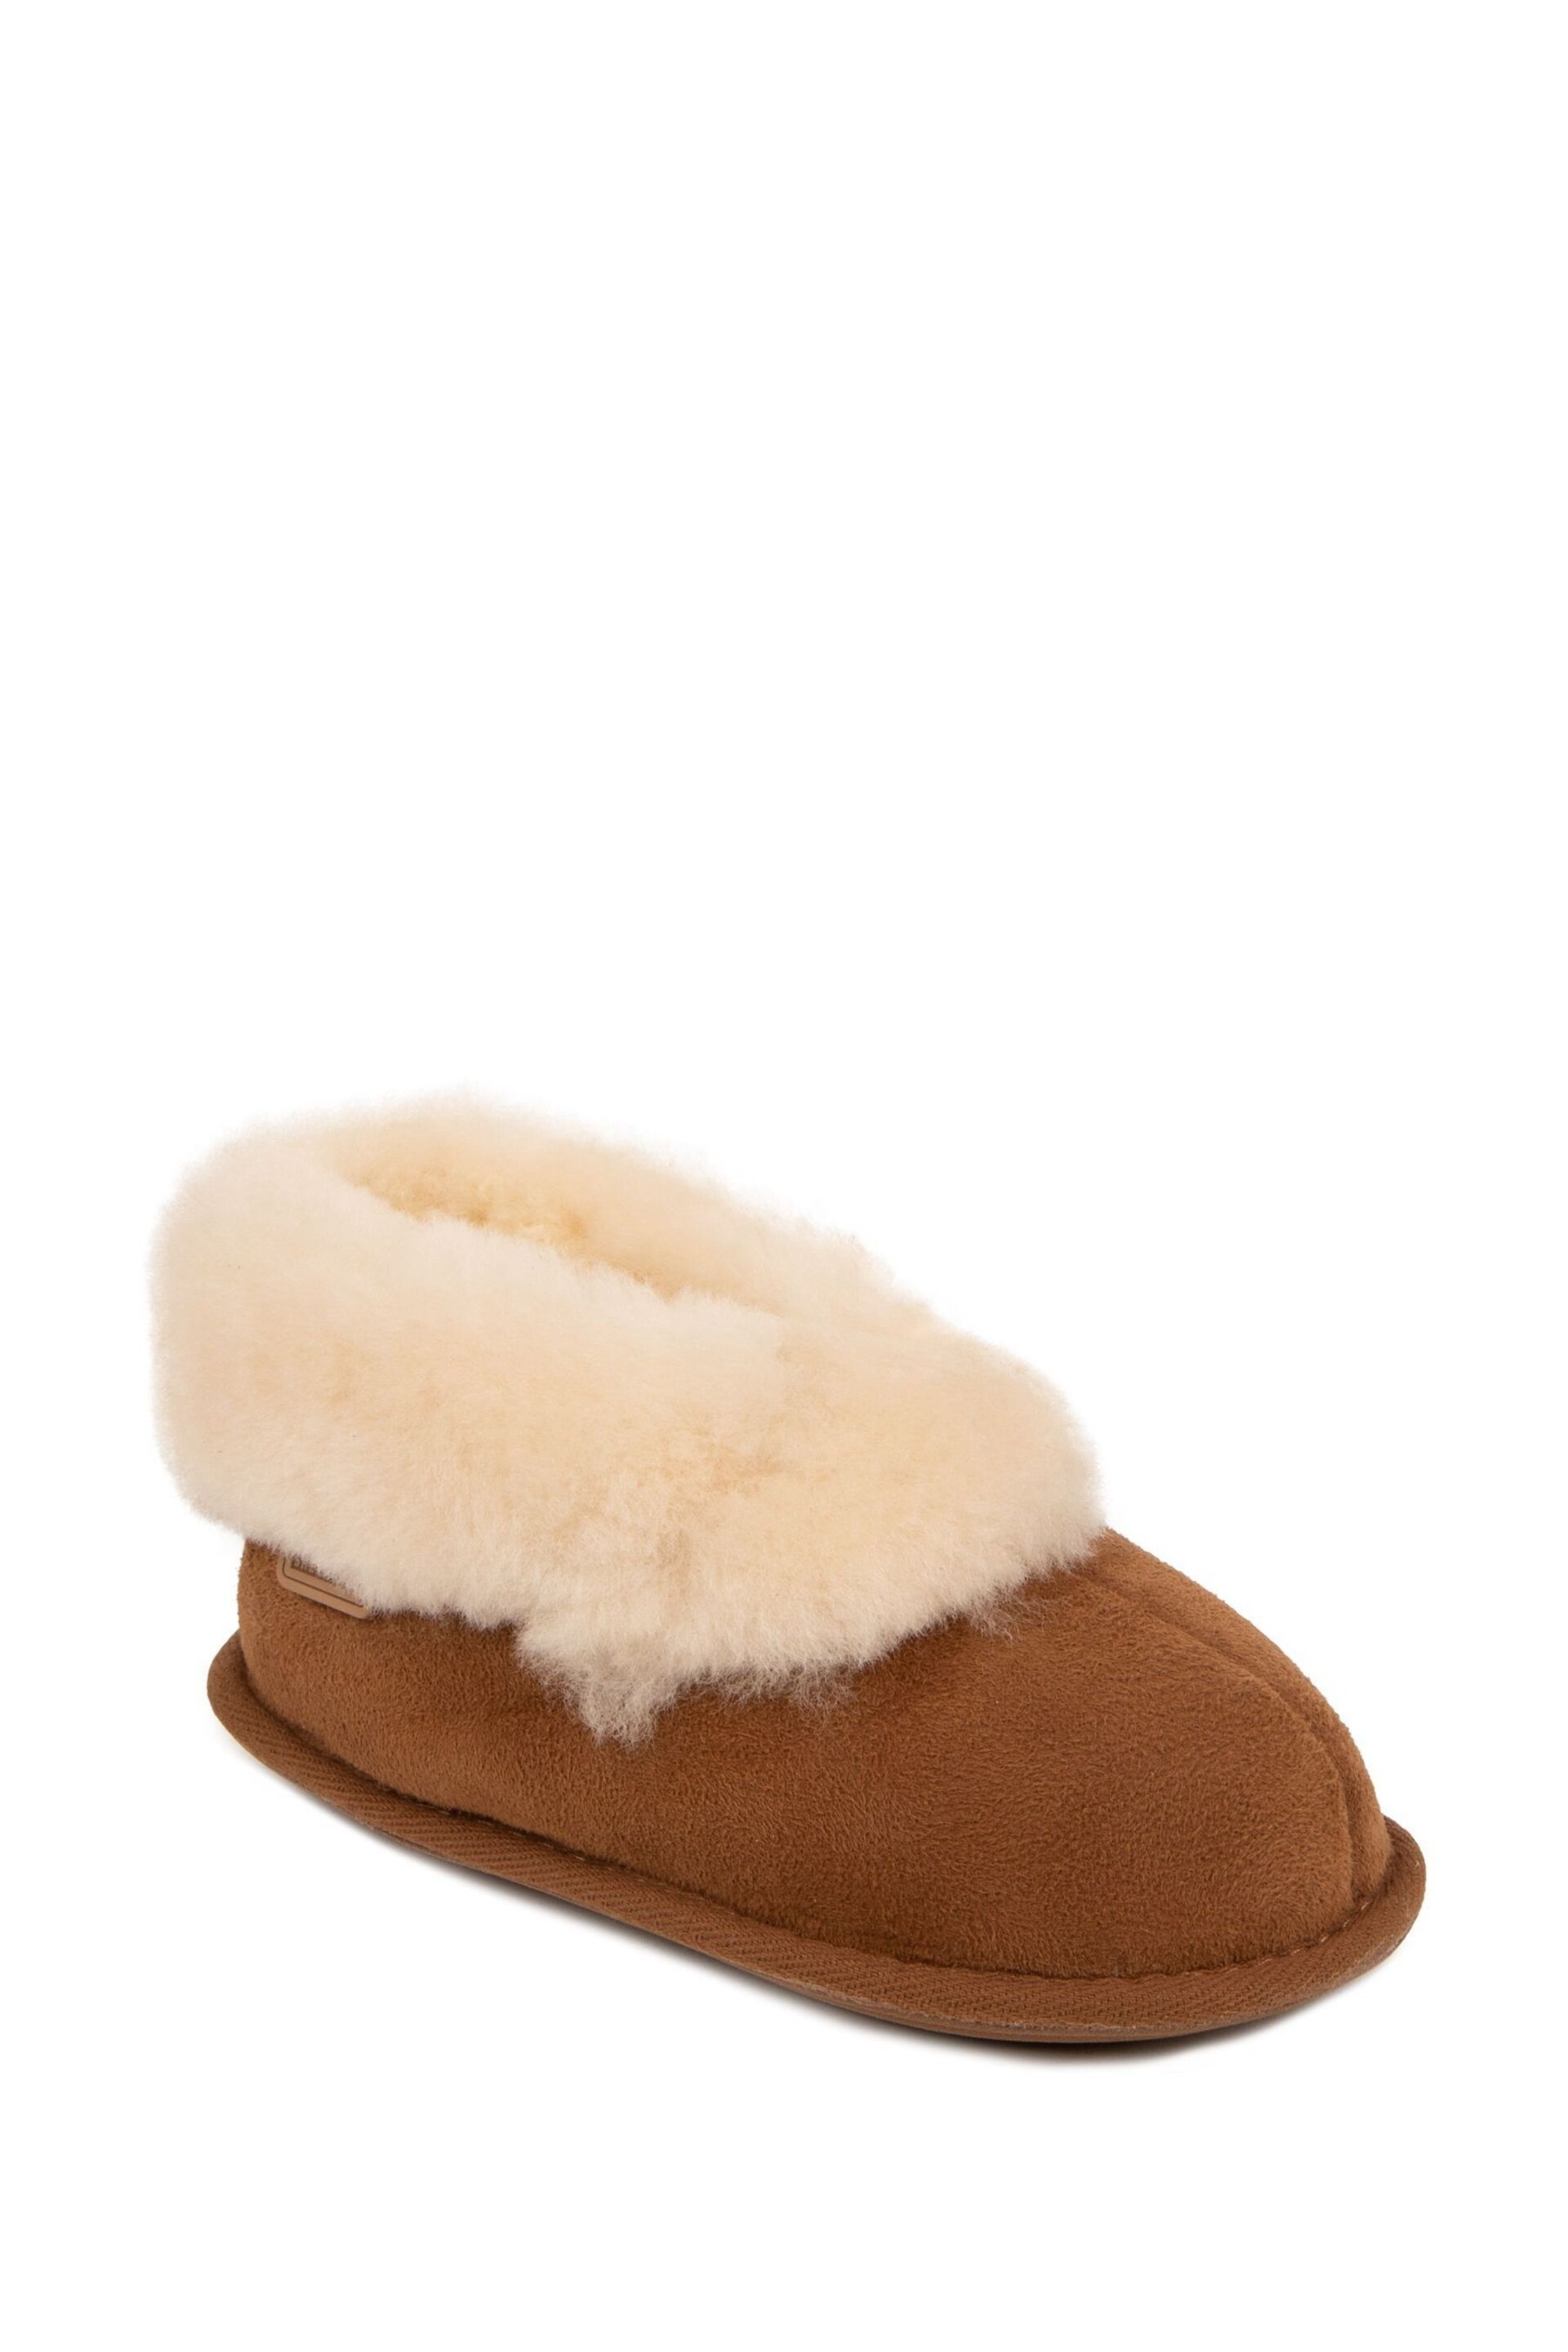 Just Sheepskin™ Brown Childrens Classic Slippers - Image 3 of 5